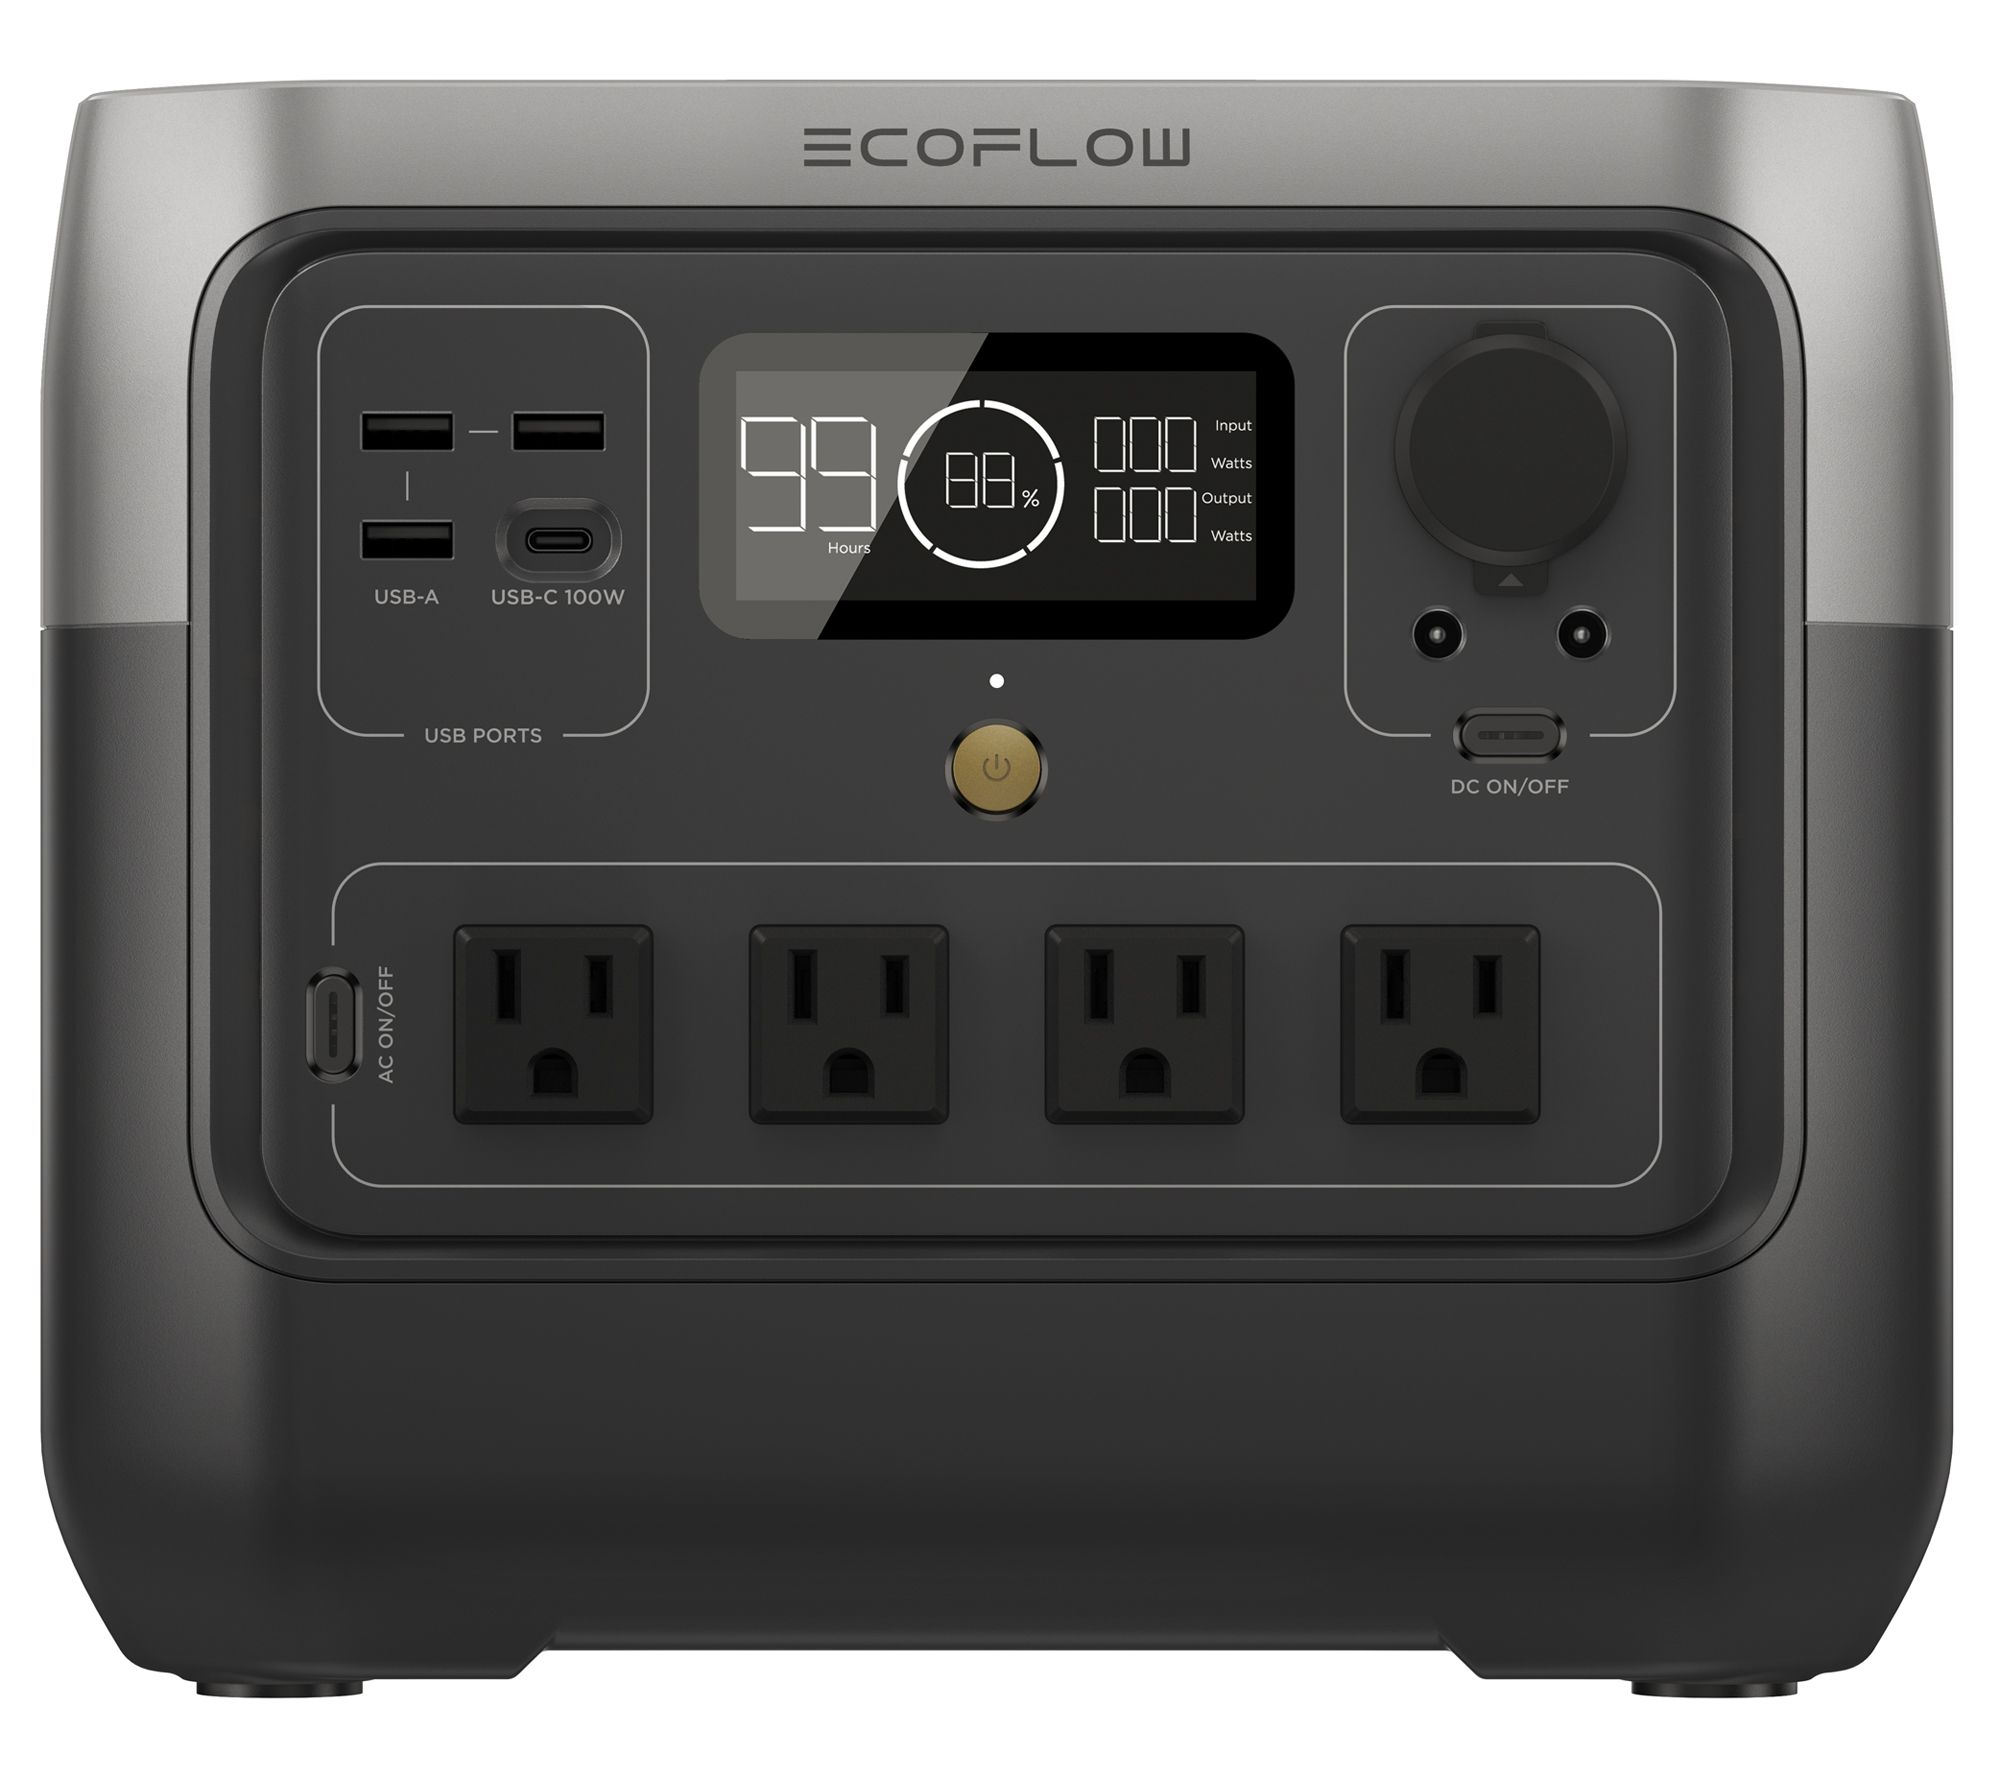 Low wattage coffee maker powered by Ecoflow River 